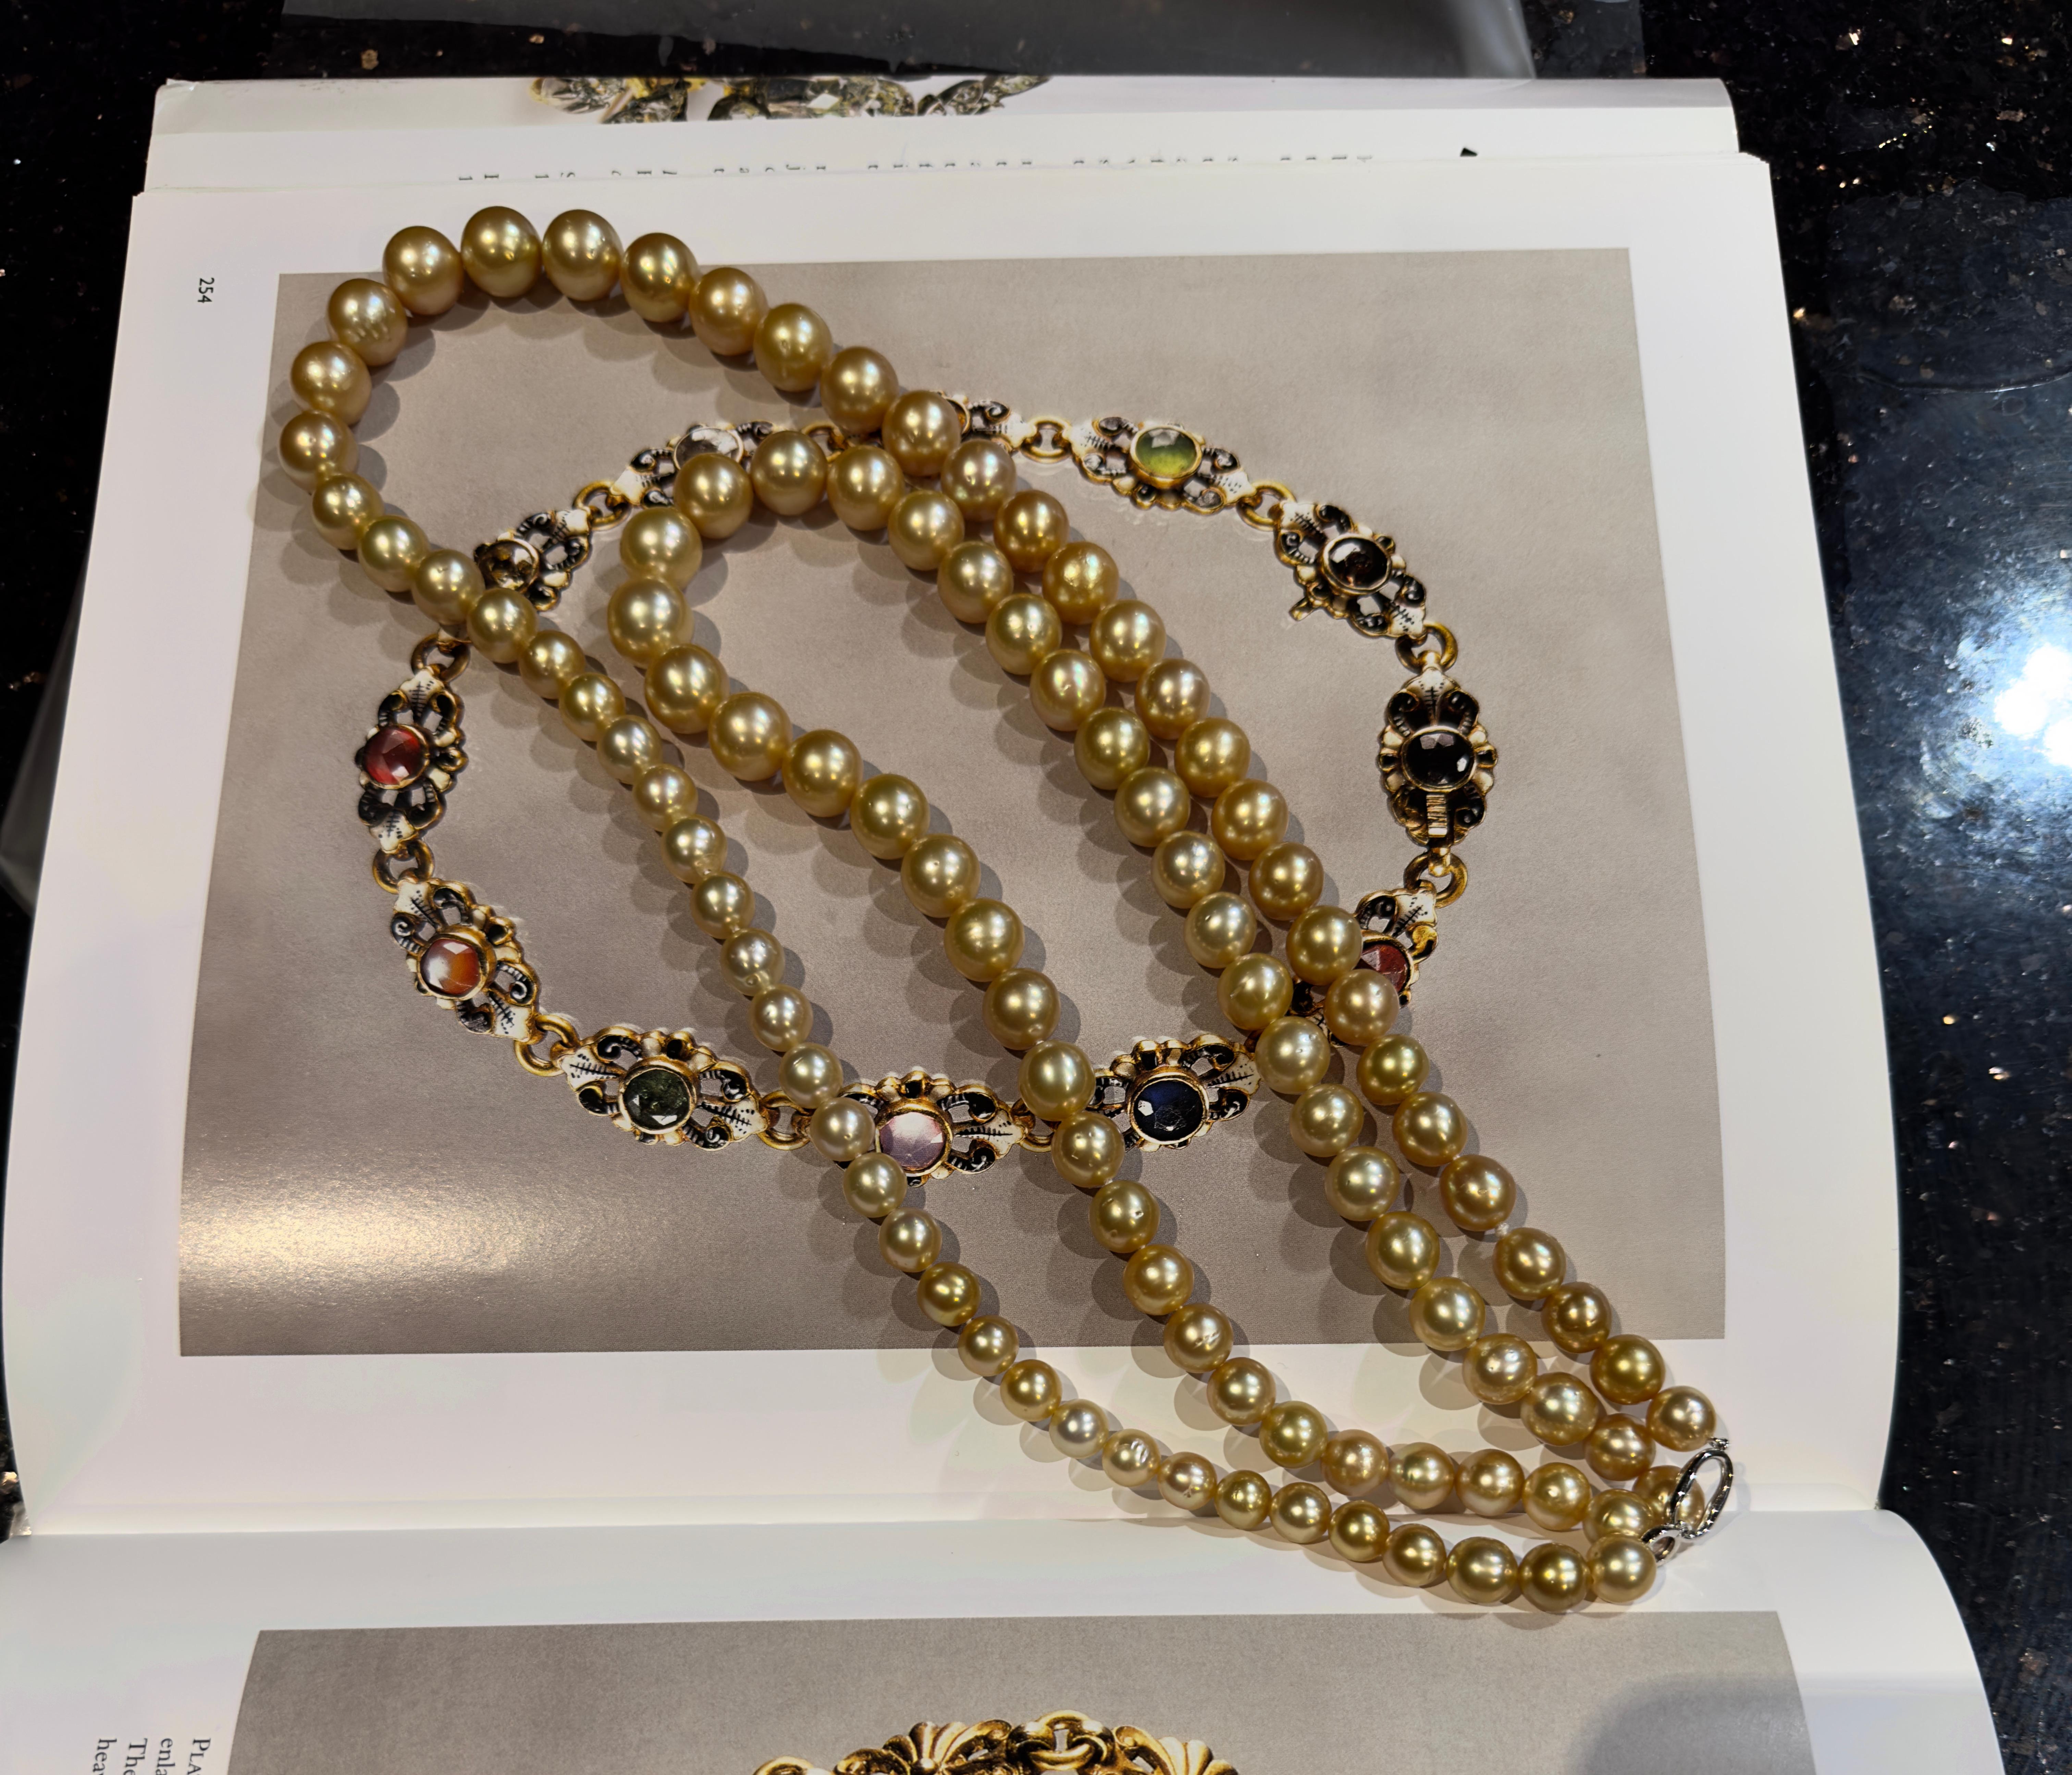 

A strand of  golden south sea pearl long chain. it consists 99 pieces golden south sea pearl,  shape of round and off round, medium to deep golden color with high lustre and pinkish overtone.
Length is 120cm
with a 18k white gold clasp
with very